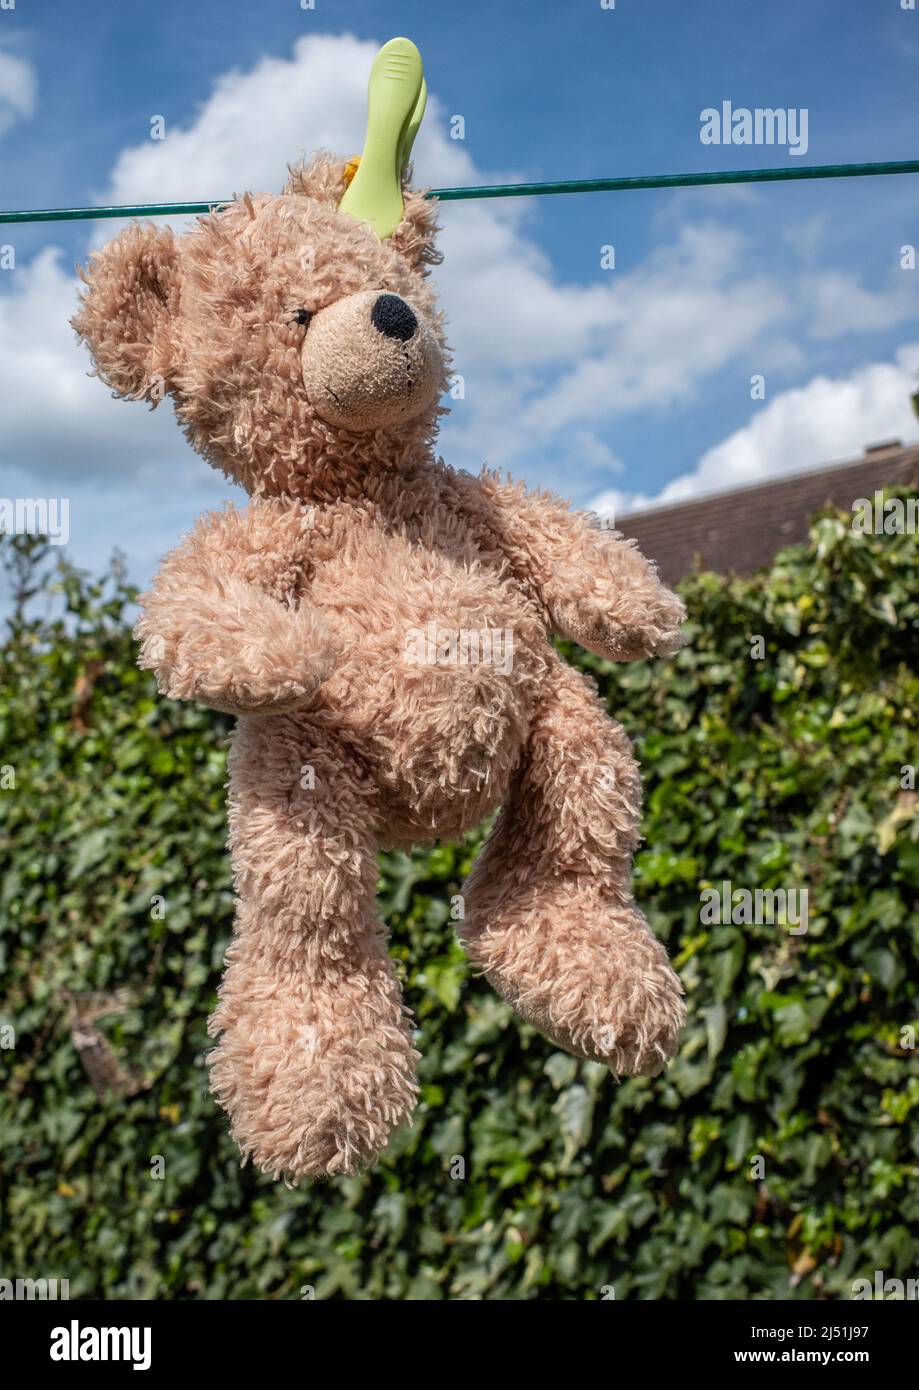 A brown teddy bear cuddly toy hanging on a washing line with a single peg, with a green hedge background Stock Photo